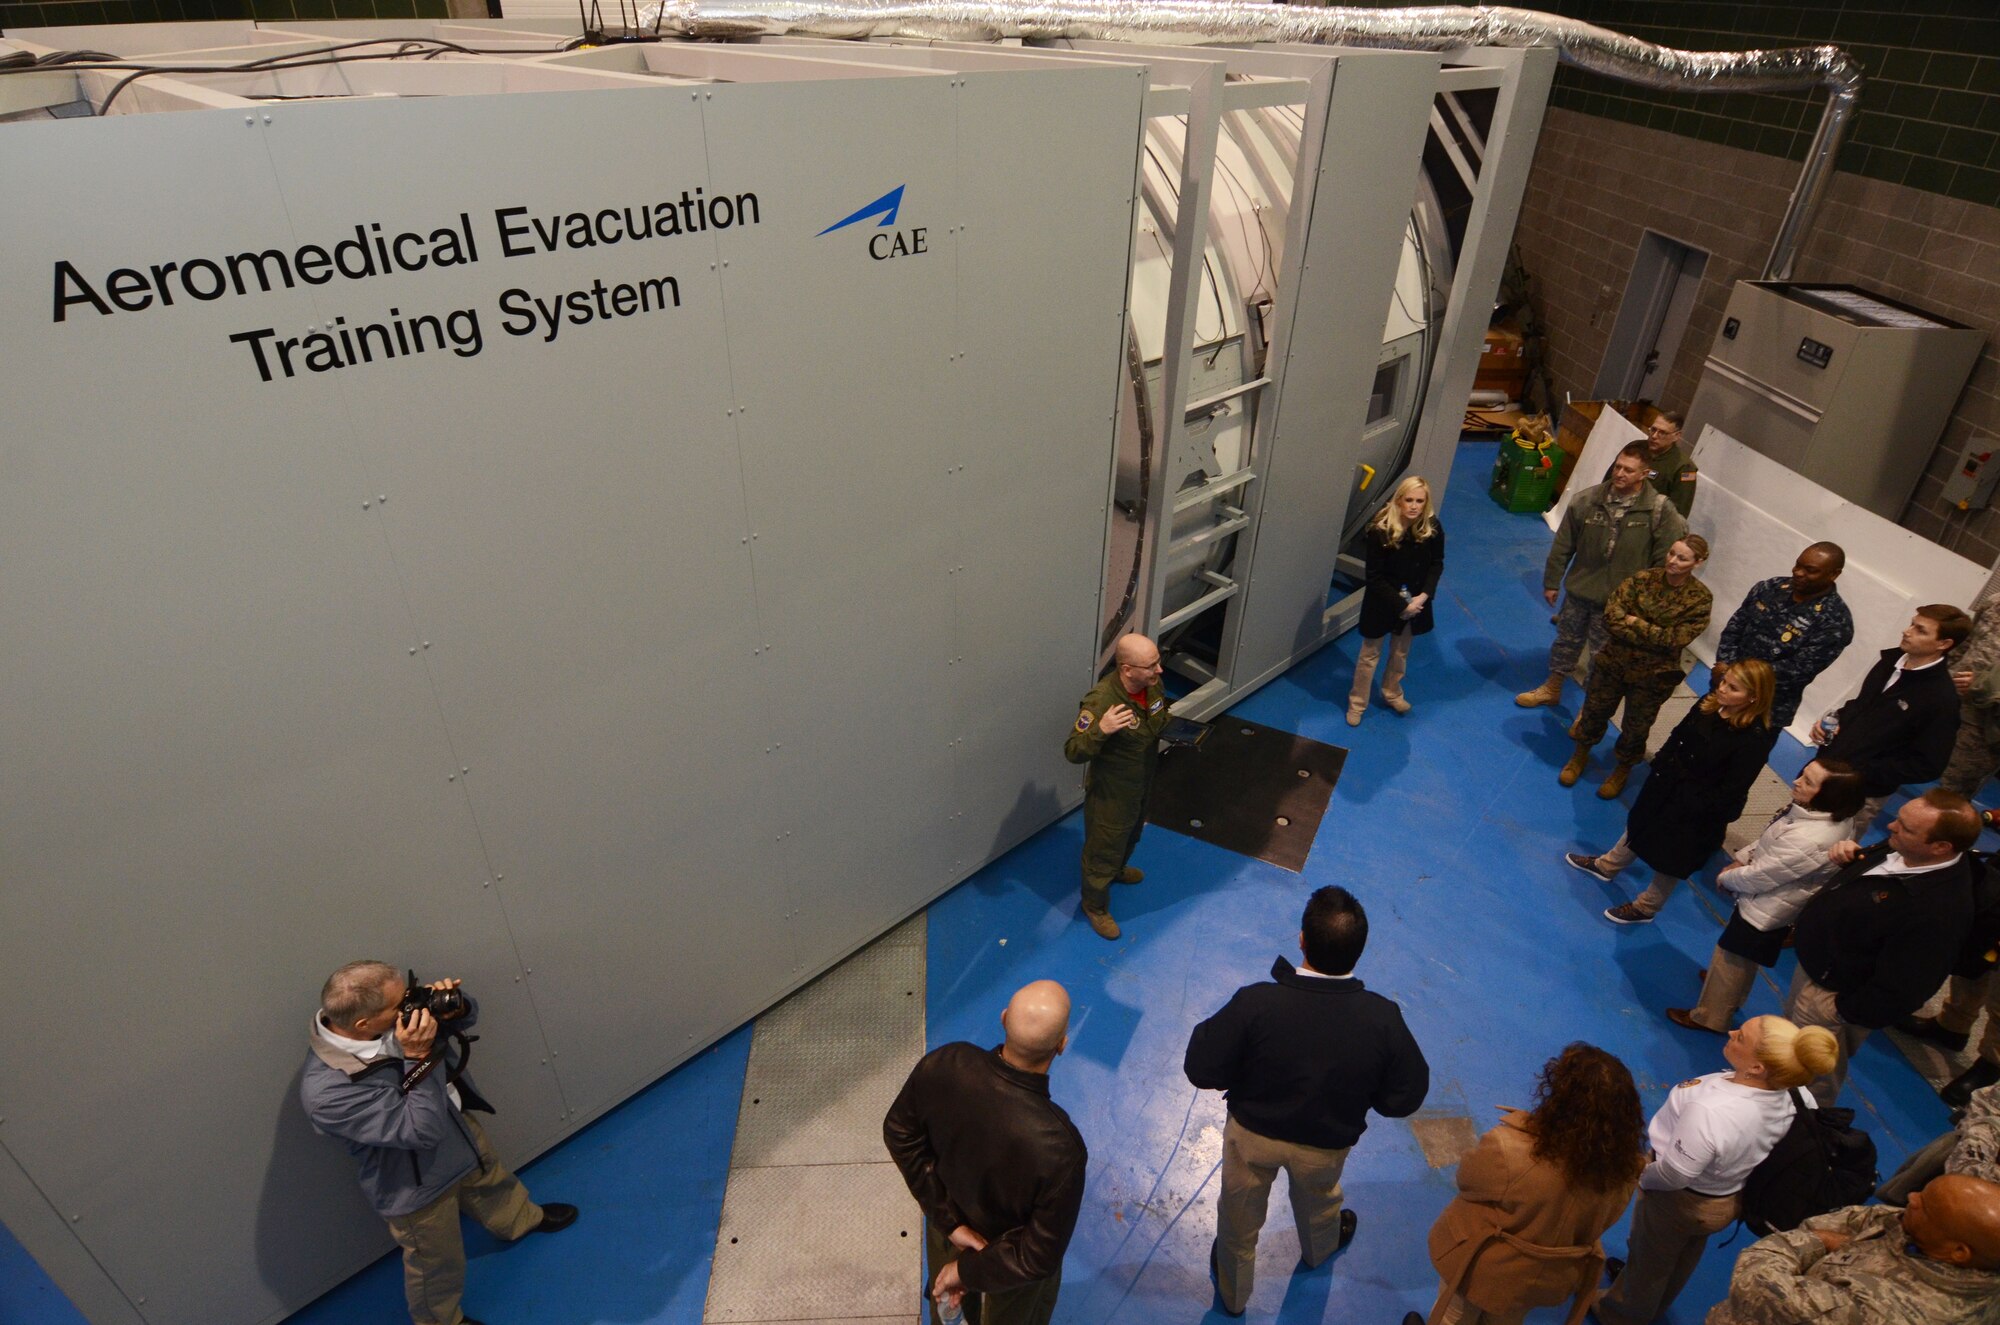 Maj. Chad Corliss, Director of Operations from the 94th Aeromedical Evacuation Squadron, briefs members of the Honorary Commanders Association on the functions of a newly installed aeromedical evacuation training simulator. The system is designed to simulate various emergency conditions experienced by medical personnel during evacuation scenarios. The demonstration was part of Dobbins Day, a base tour conducted on Dobbins Air Reserve Base, Ga. Feb. 12, 2016 (U.S. Air Force photo/Don Peek)